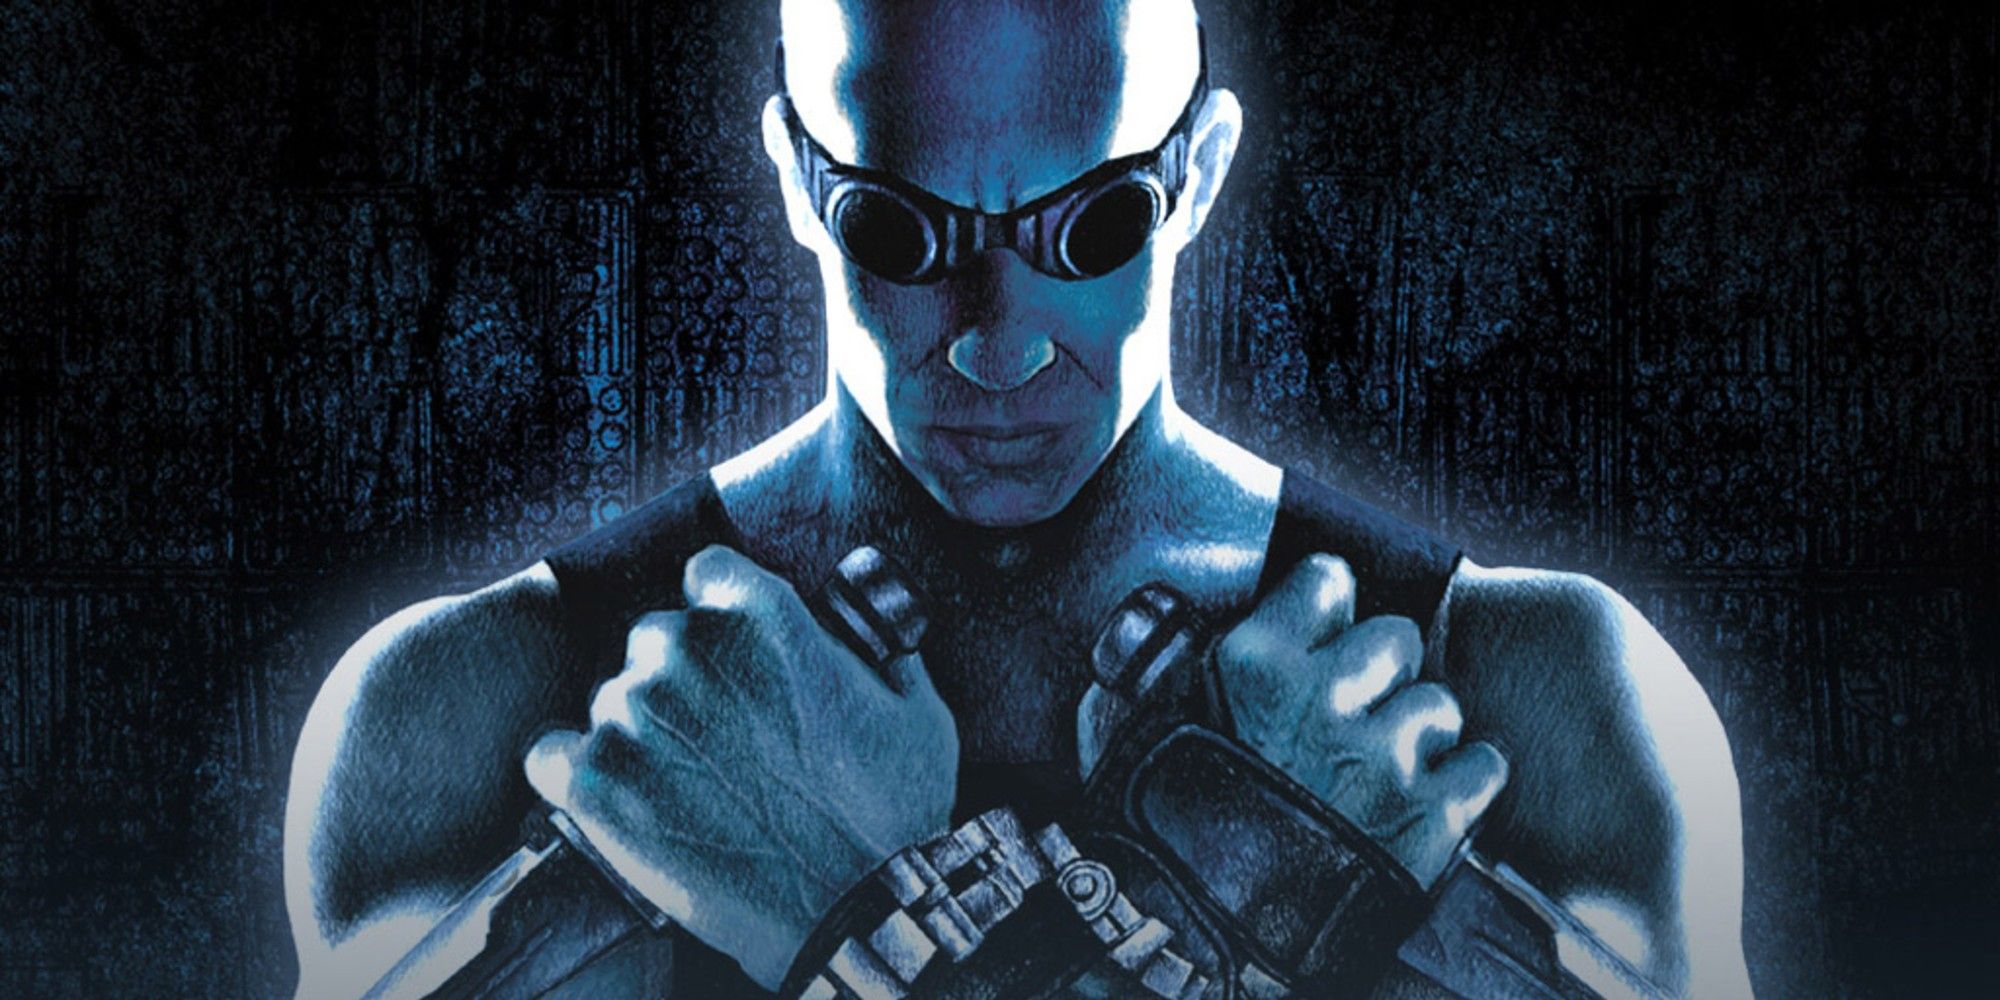 Riddick on the cover of The Chronicles of Riddick: Escape from Butcher's Bay game